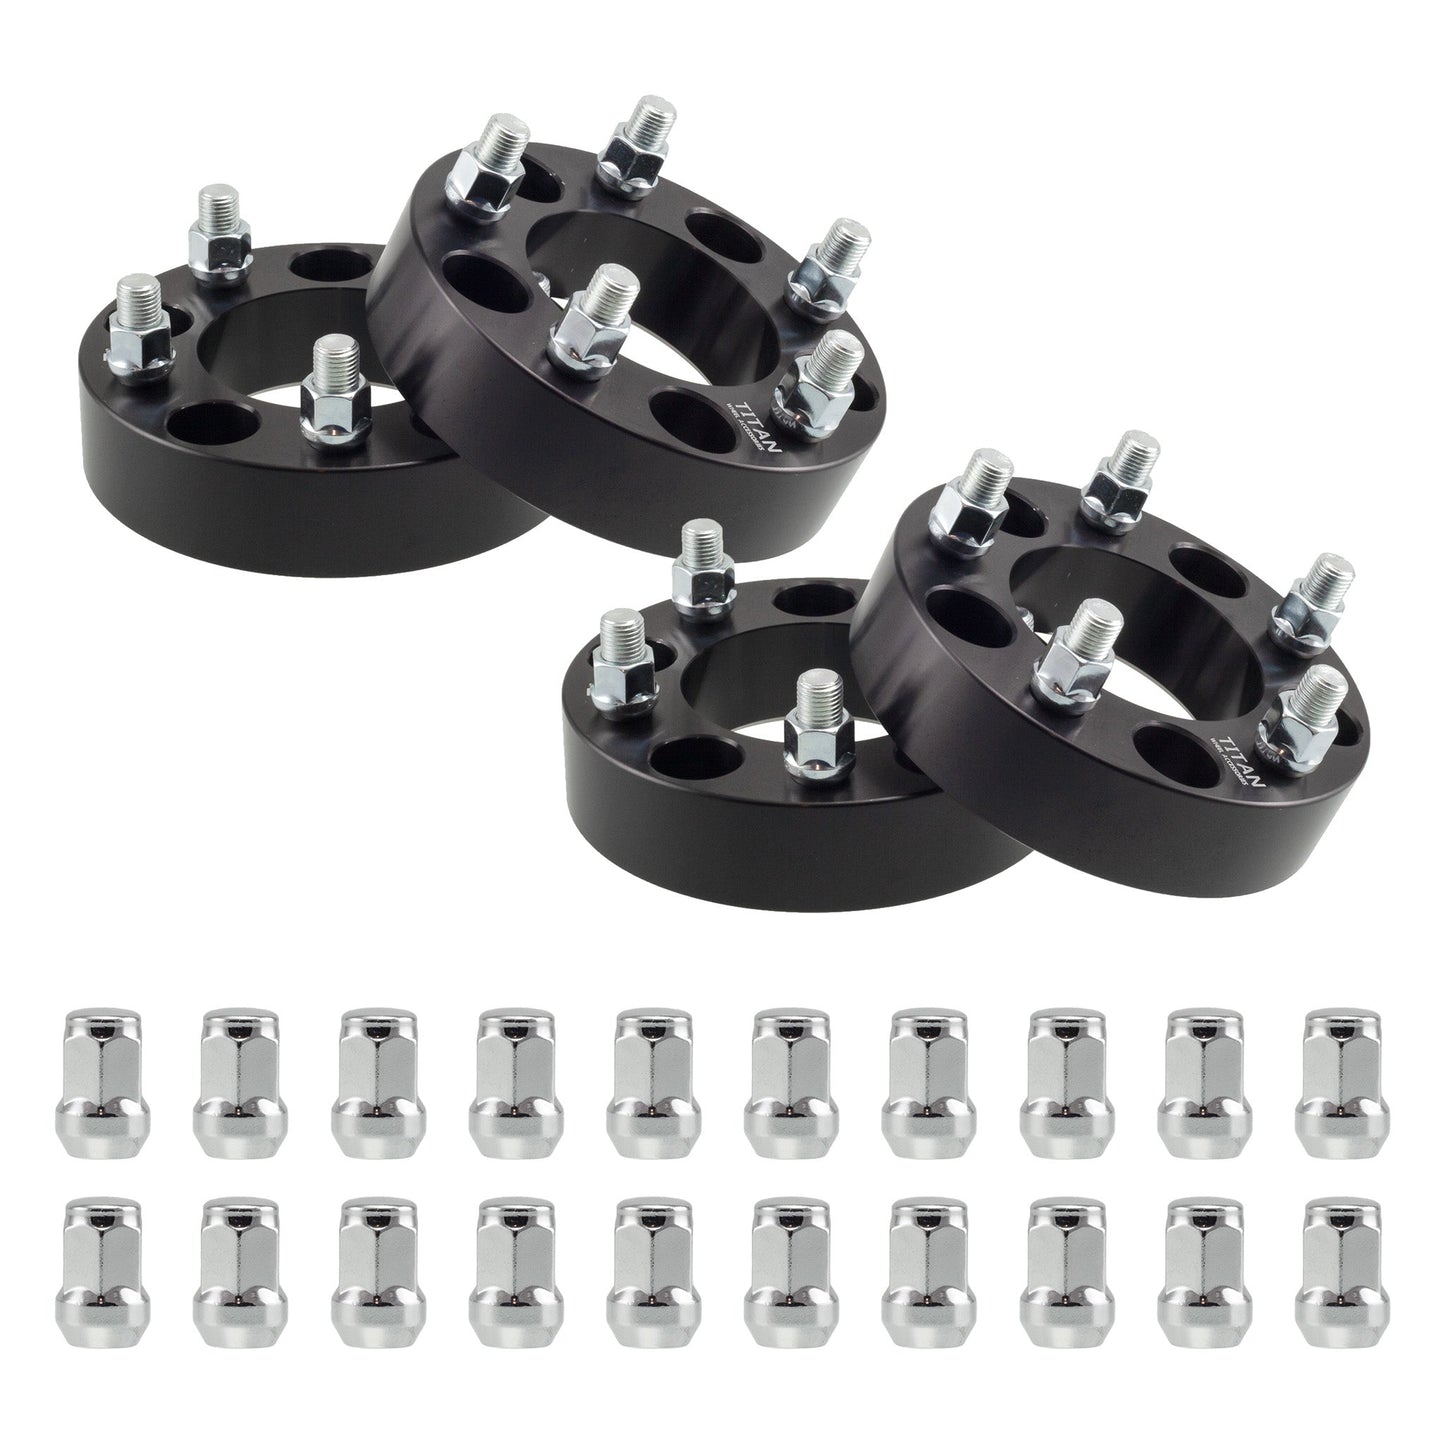 32mm (1.25") Titan Wheel Spacers for Chevy Buick Cadillac Oldsmobile | 5x114.3 (5x4.5) | 12x1.5 Studs | Titan Wheel Accessories